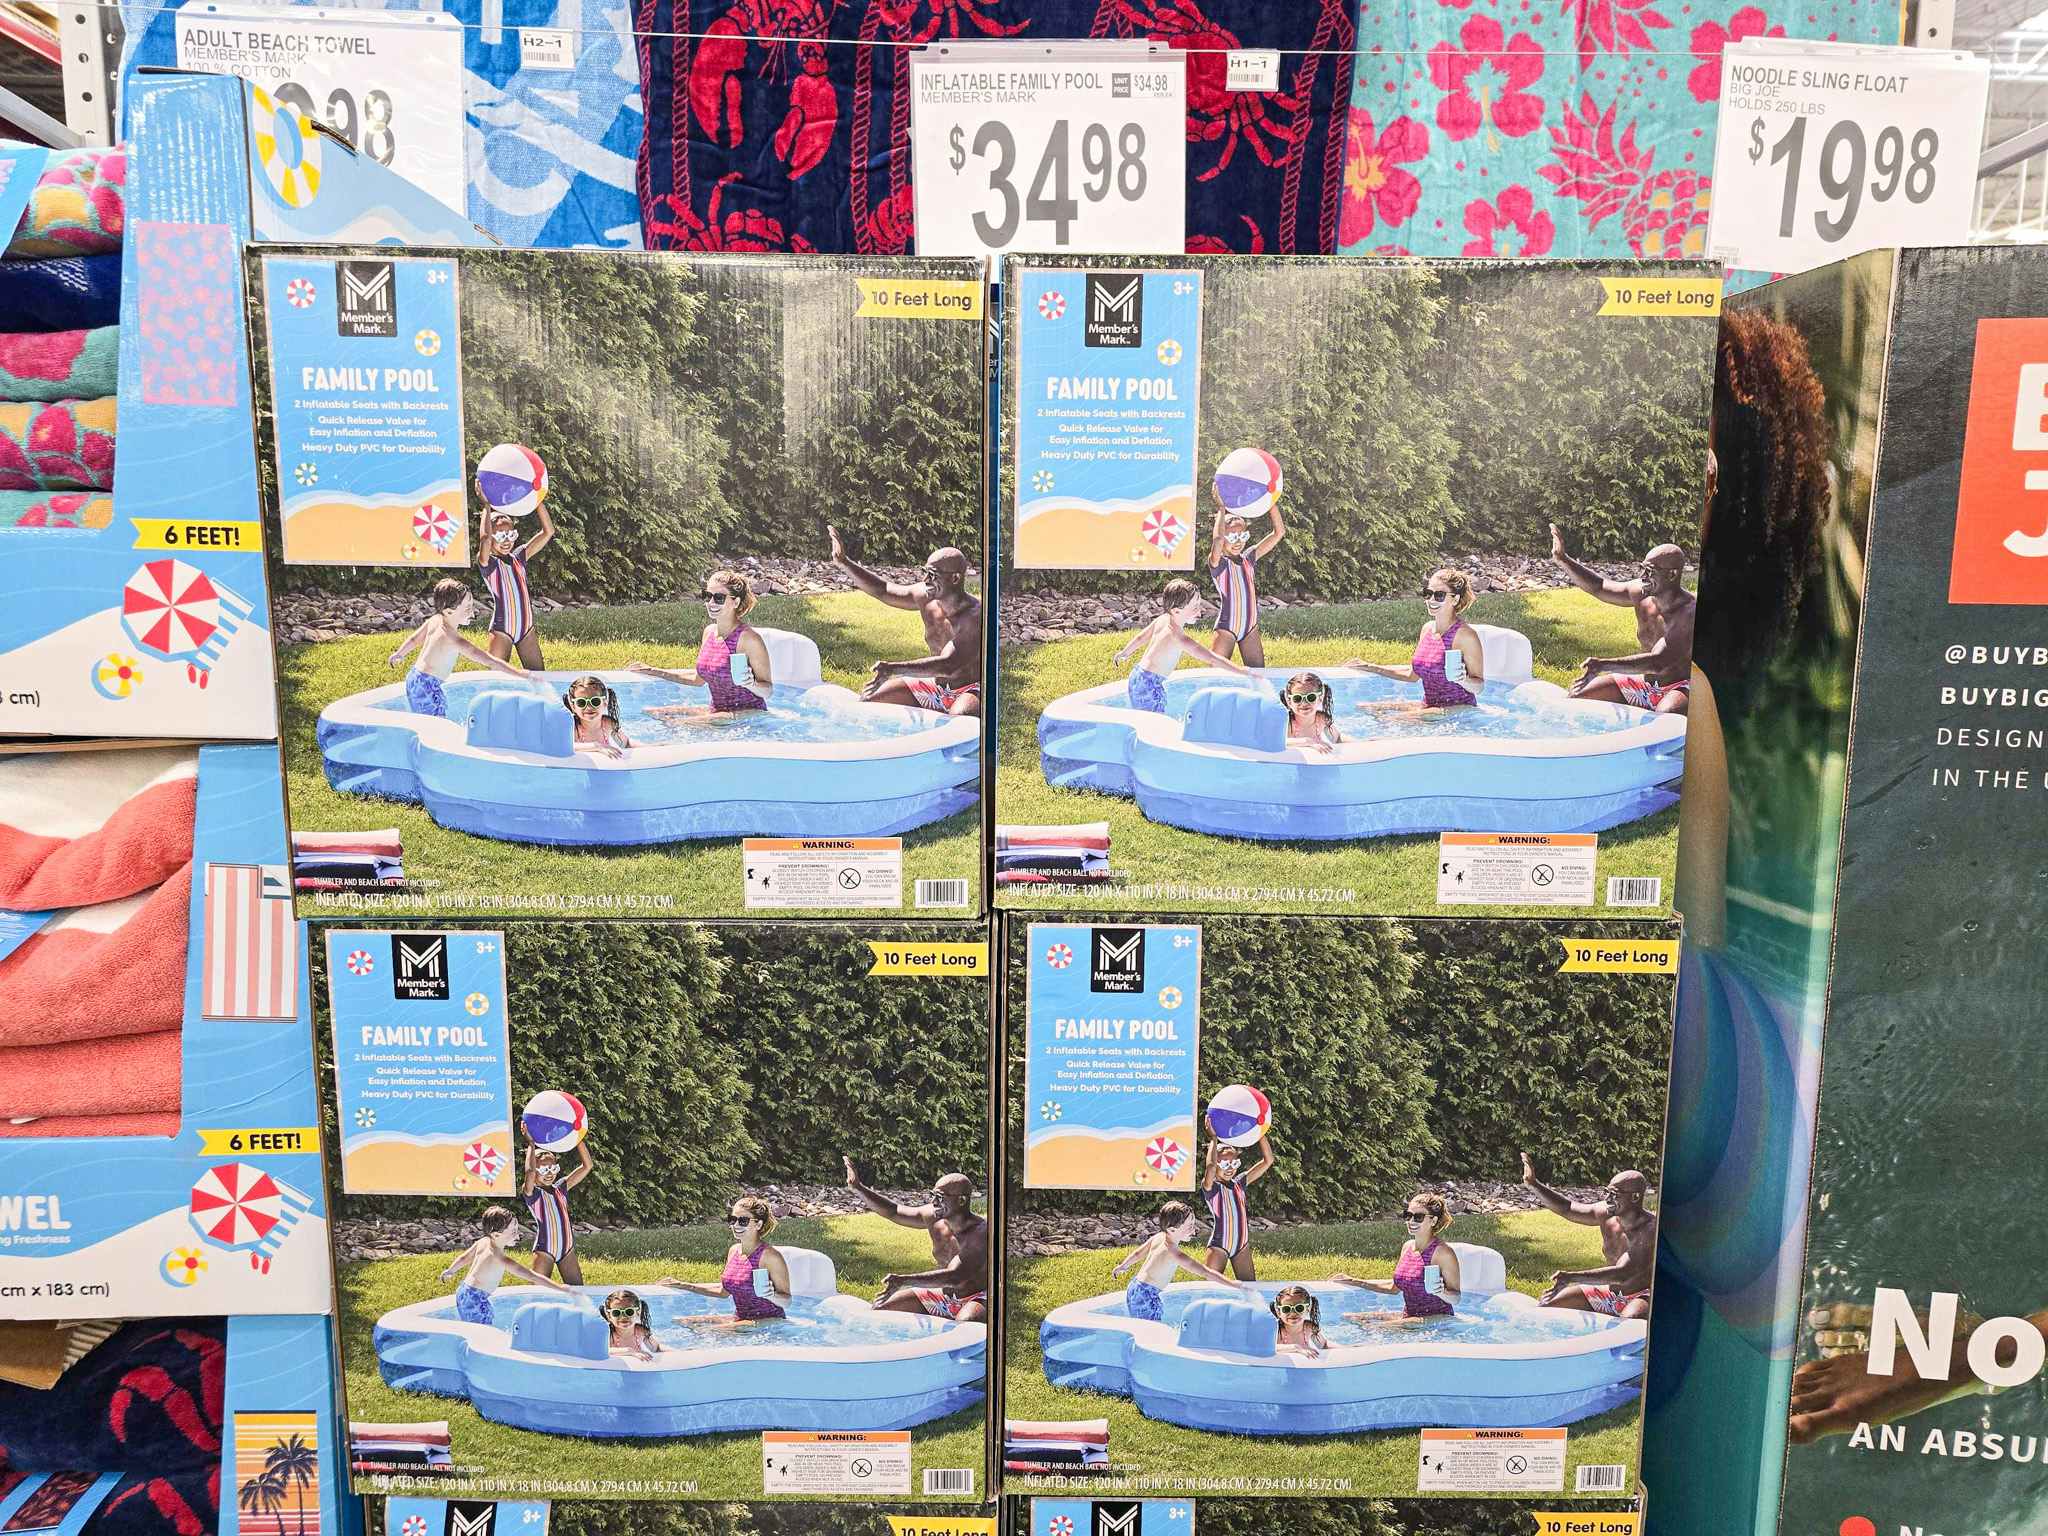 boxes stacked up of inflatable family pools with a $34.98 price sign